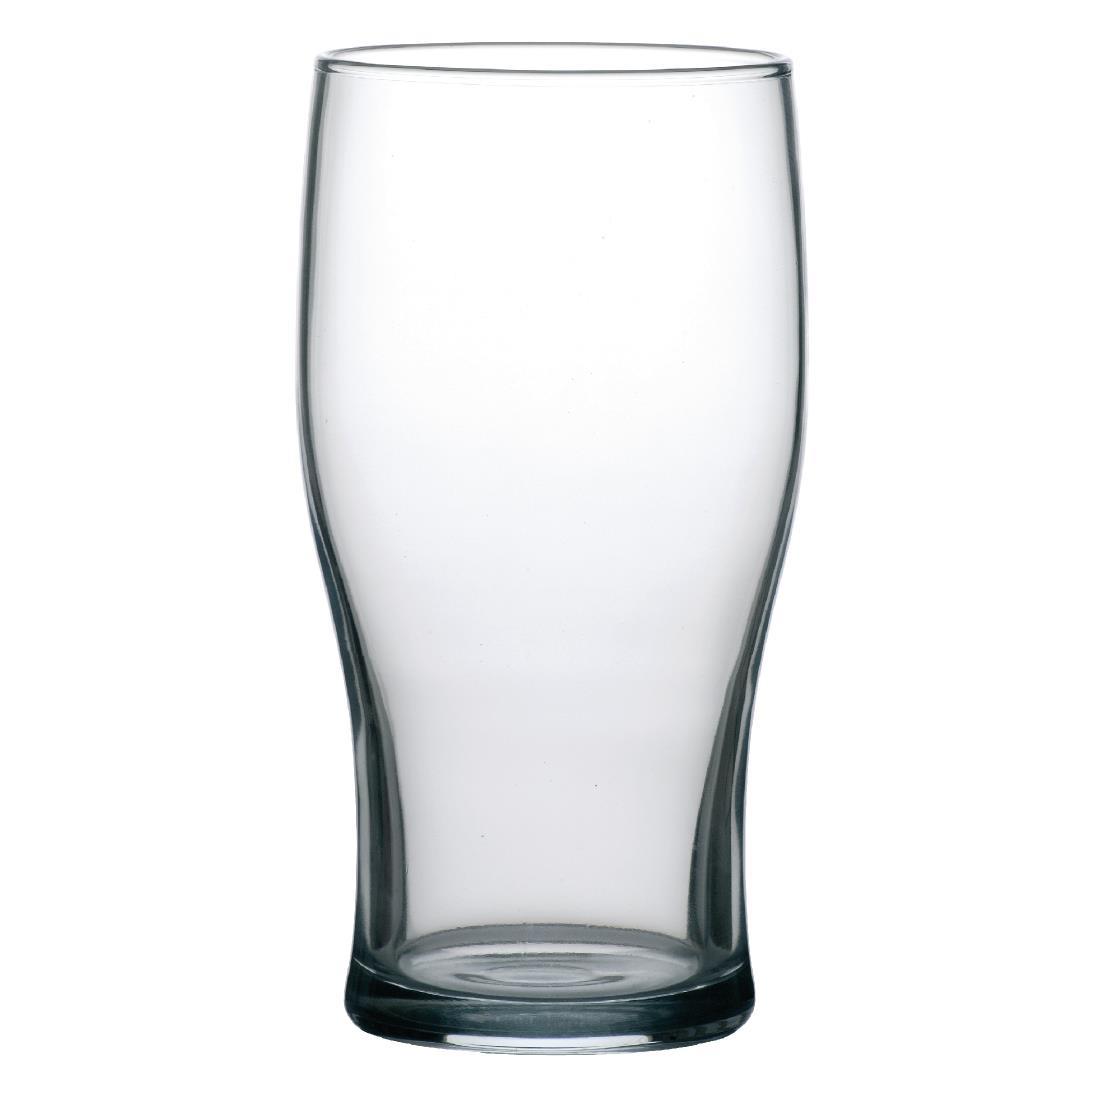 Arcoroc Tulip Nucleated Beer Glasses 570ml CE Marked (Pack of 48) - D935  - 1